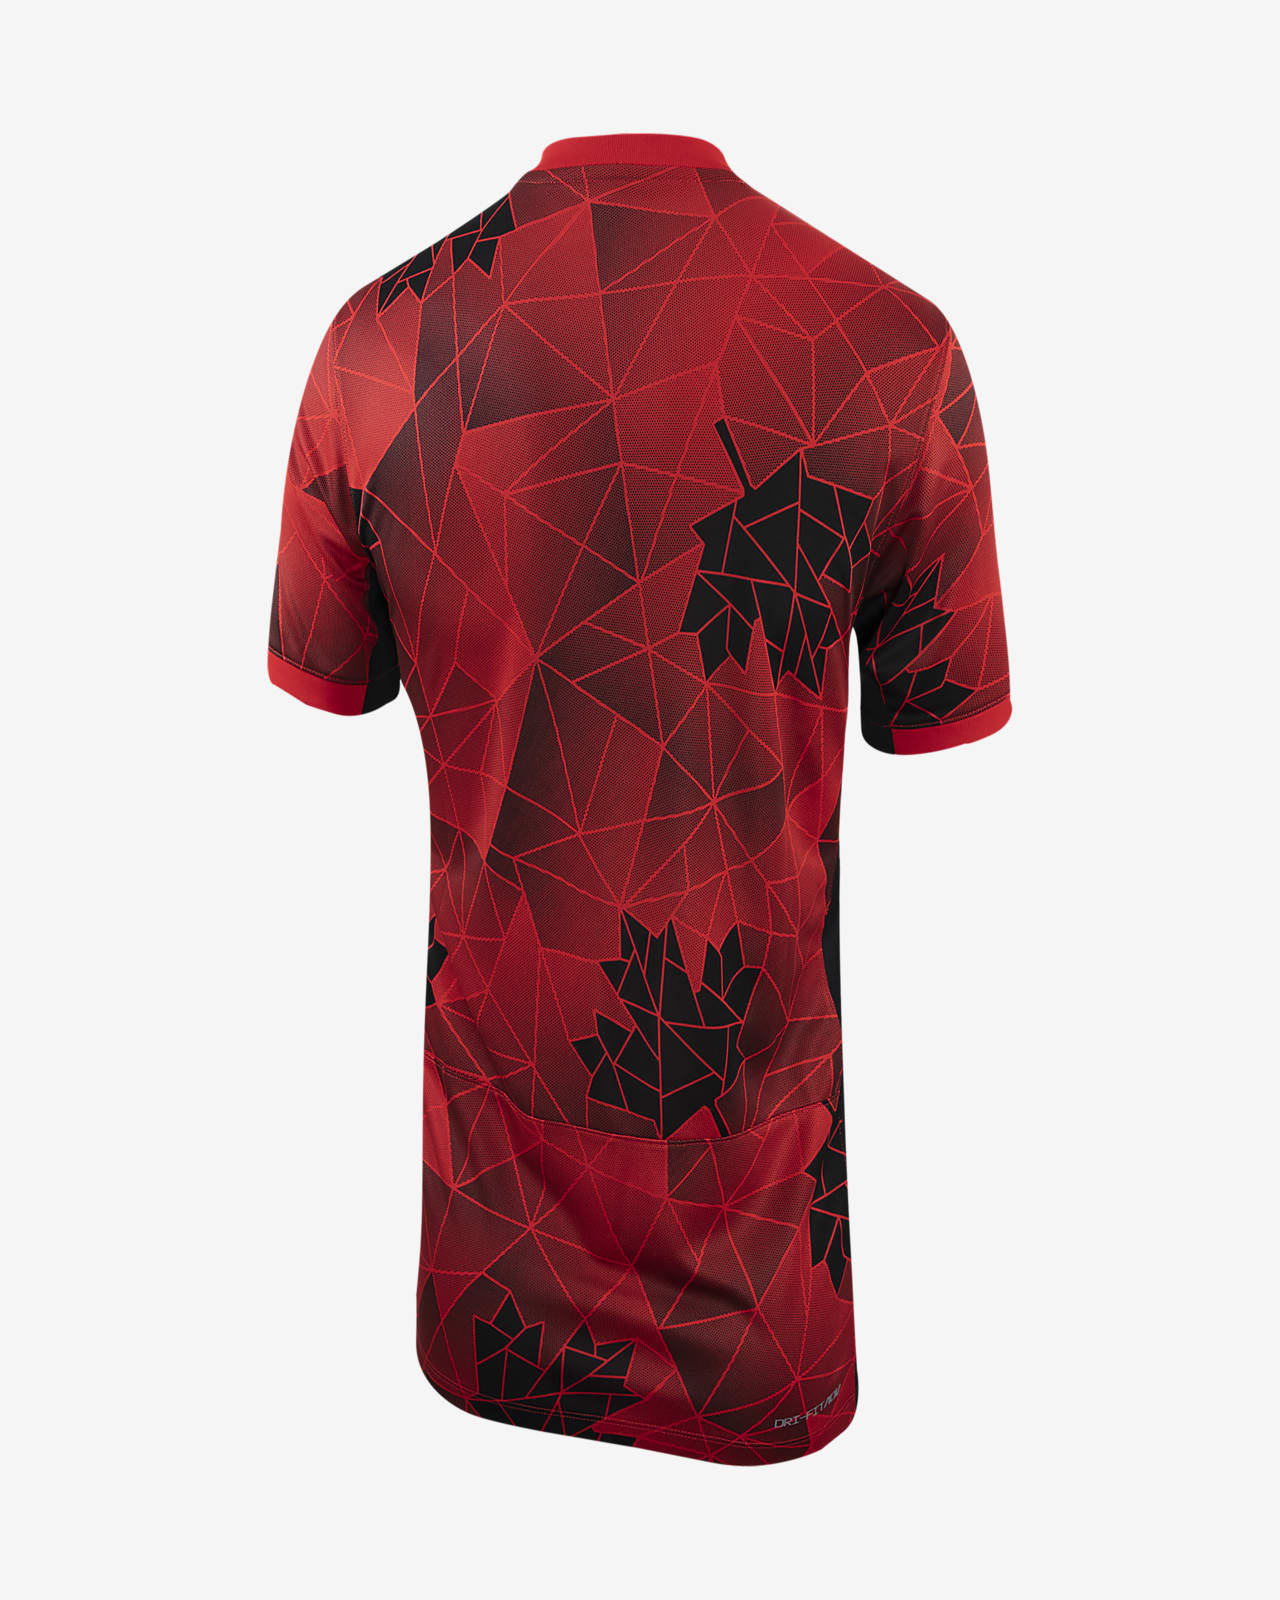 canada national team soccer jersey